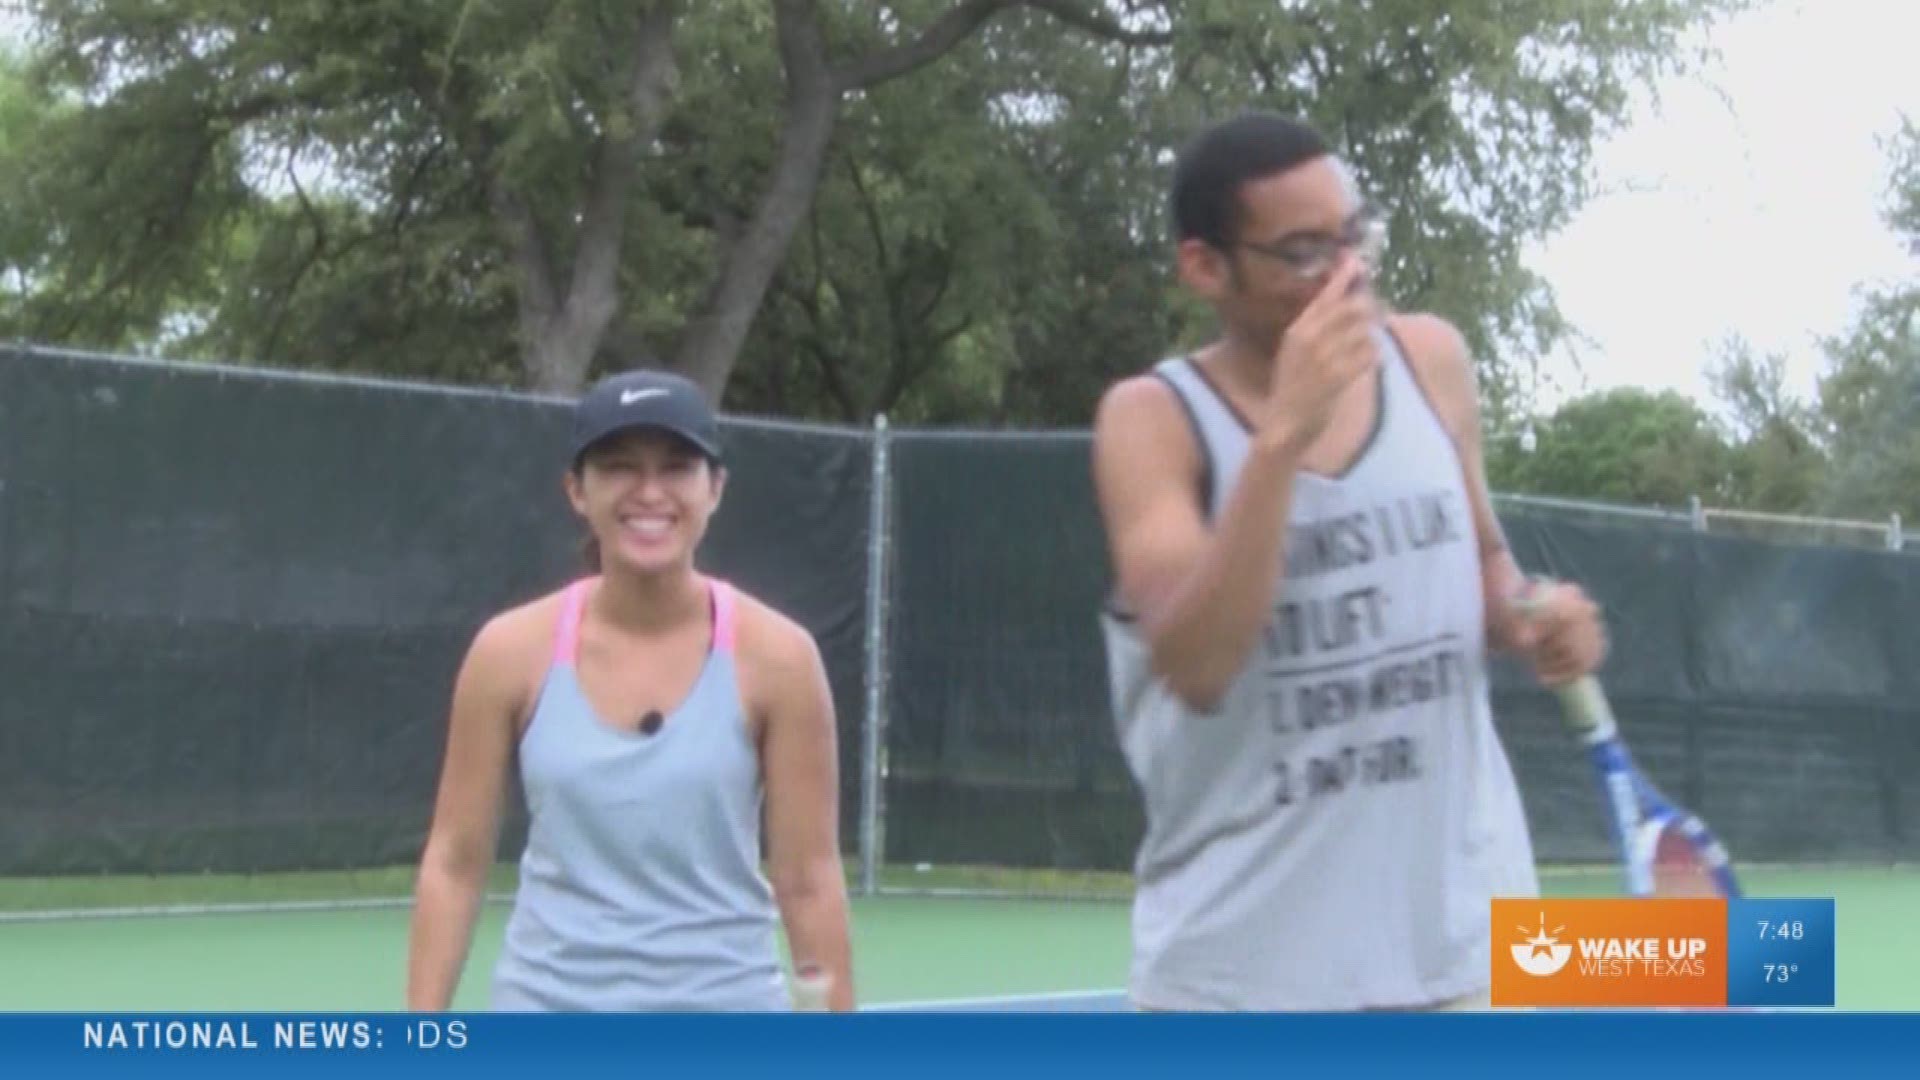 Our Malik Mingo and our Camille Requiestas went head to head in a tennis match for this week's Workout Wednesday segment.